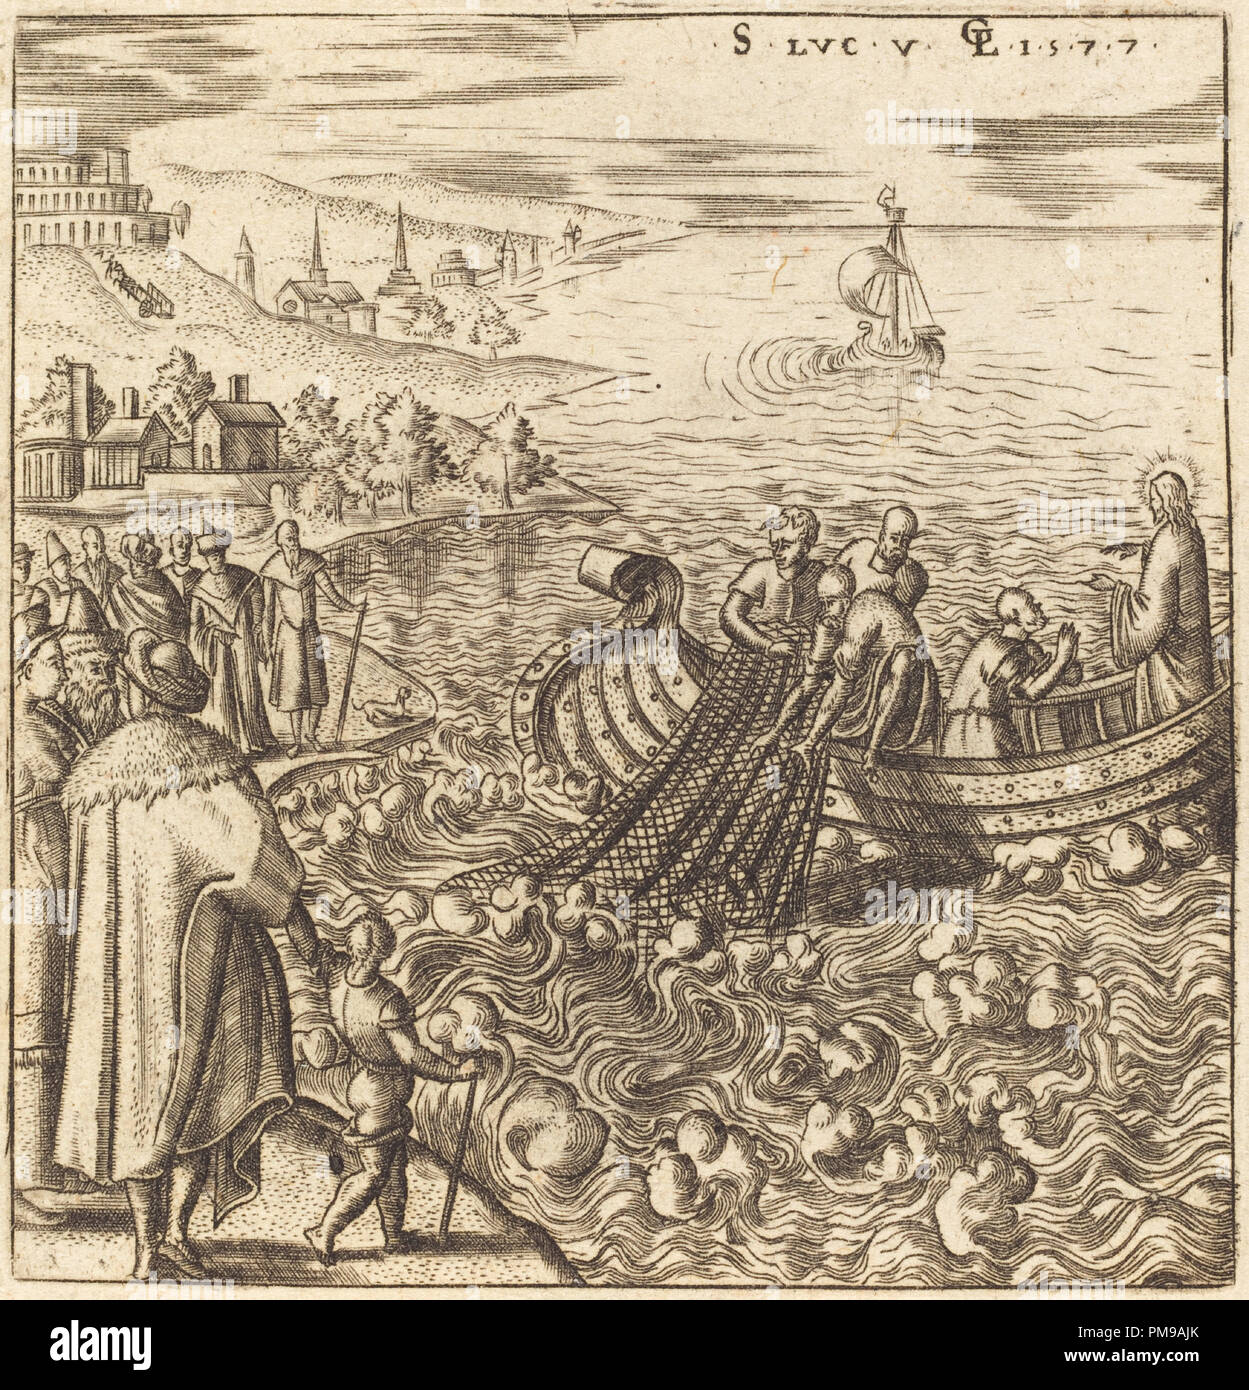 The Miraculous Draught of Fishes. Dated: 1577. Medium: engraving. Museum: National Gallery of Art, Washington DC. Author: Léonard Gaultier. Stock Photo